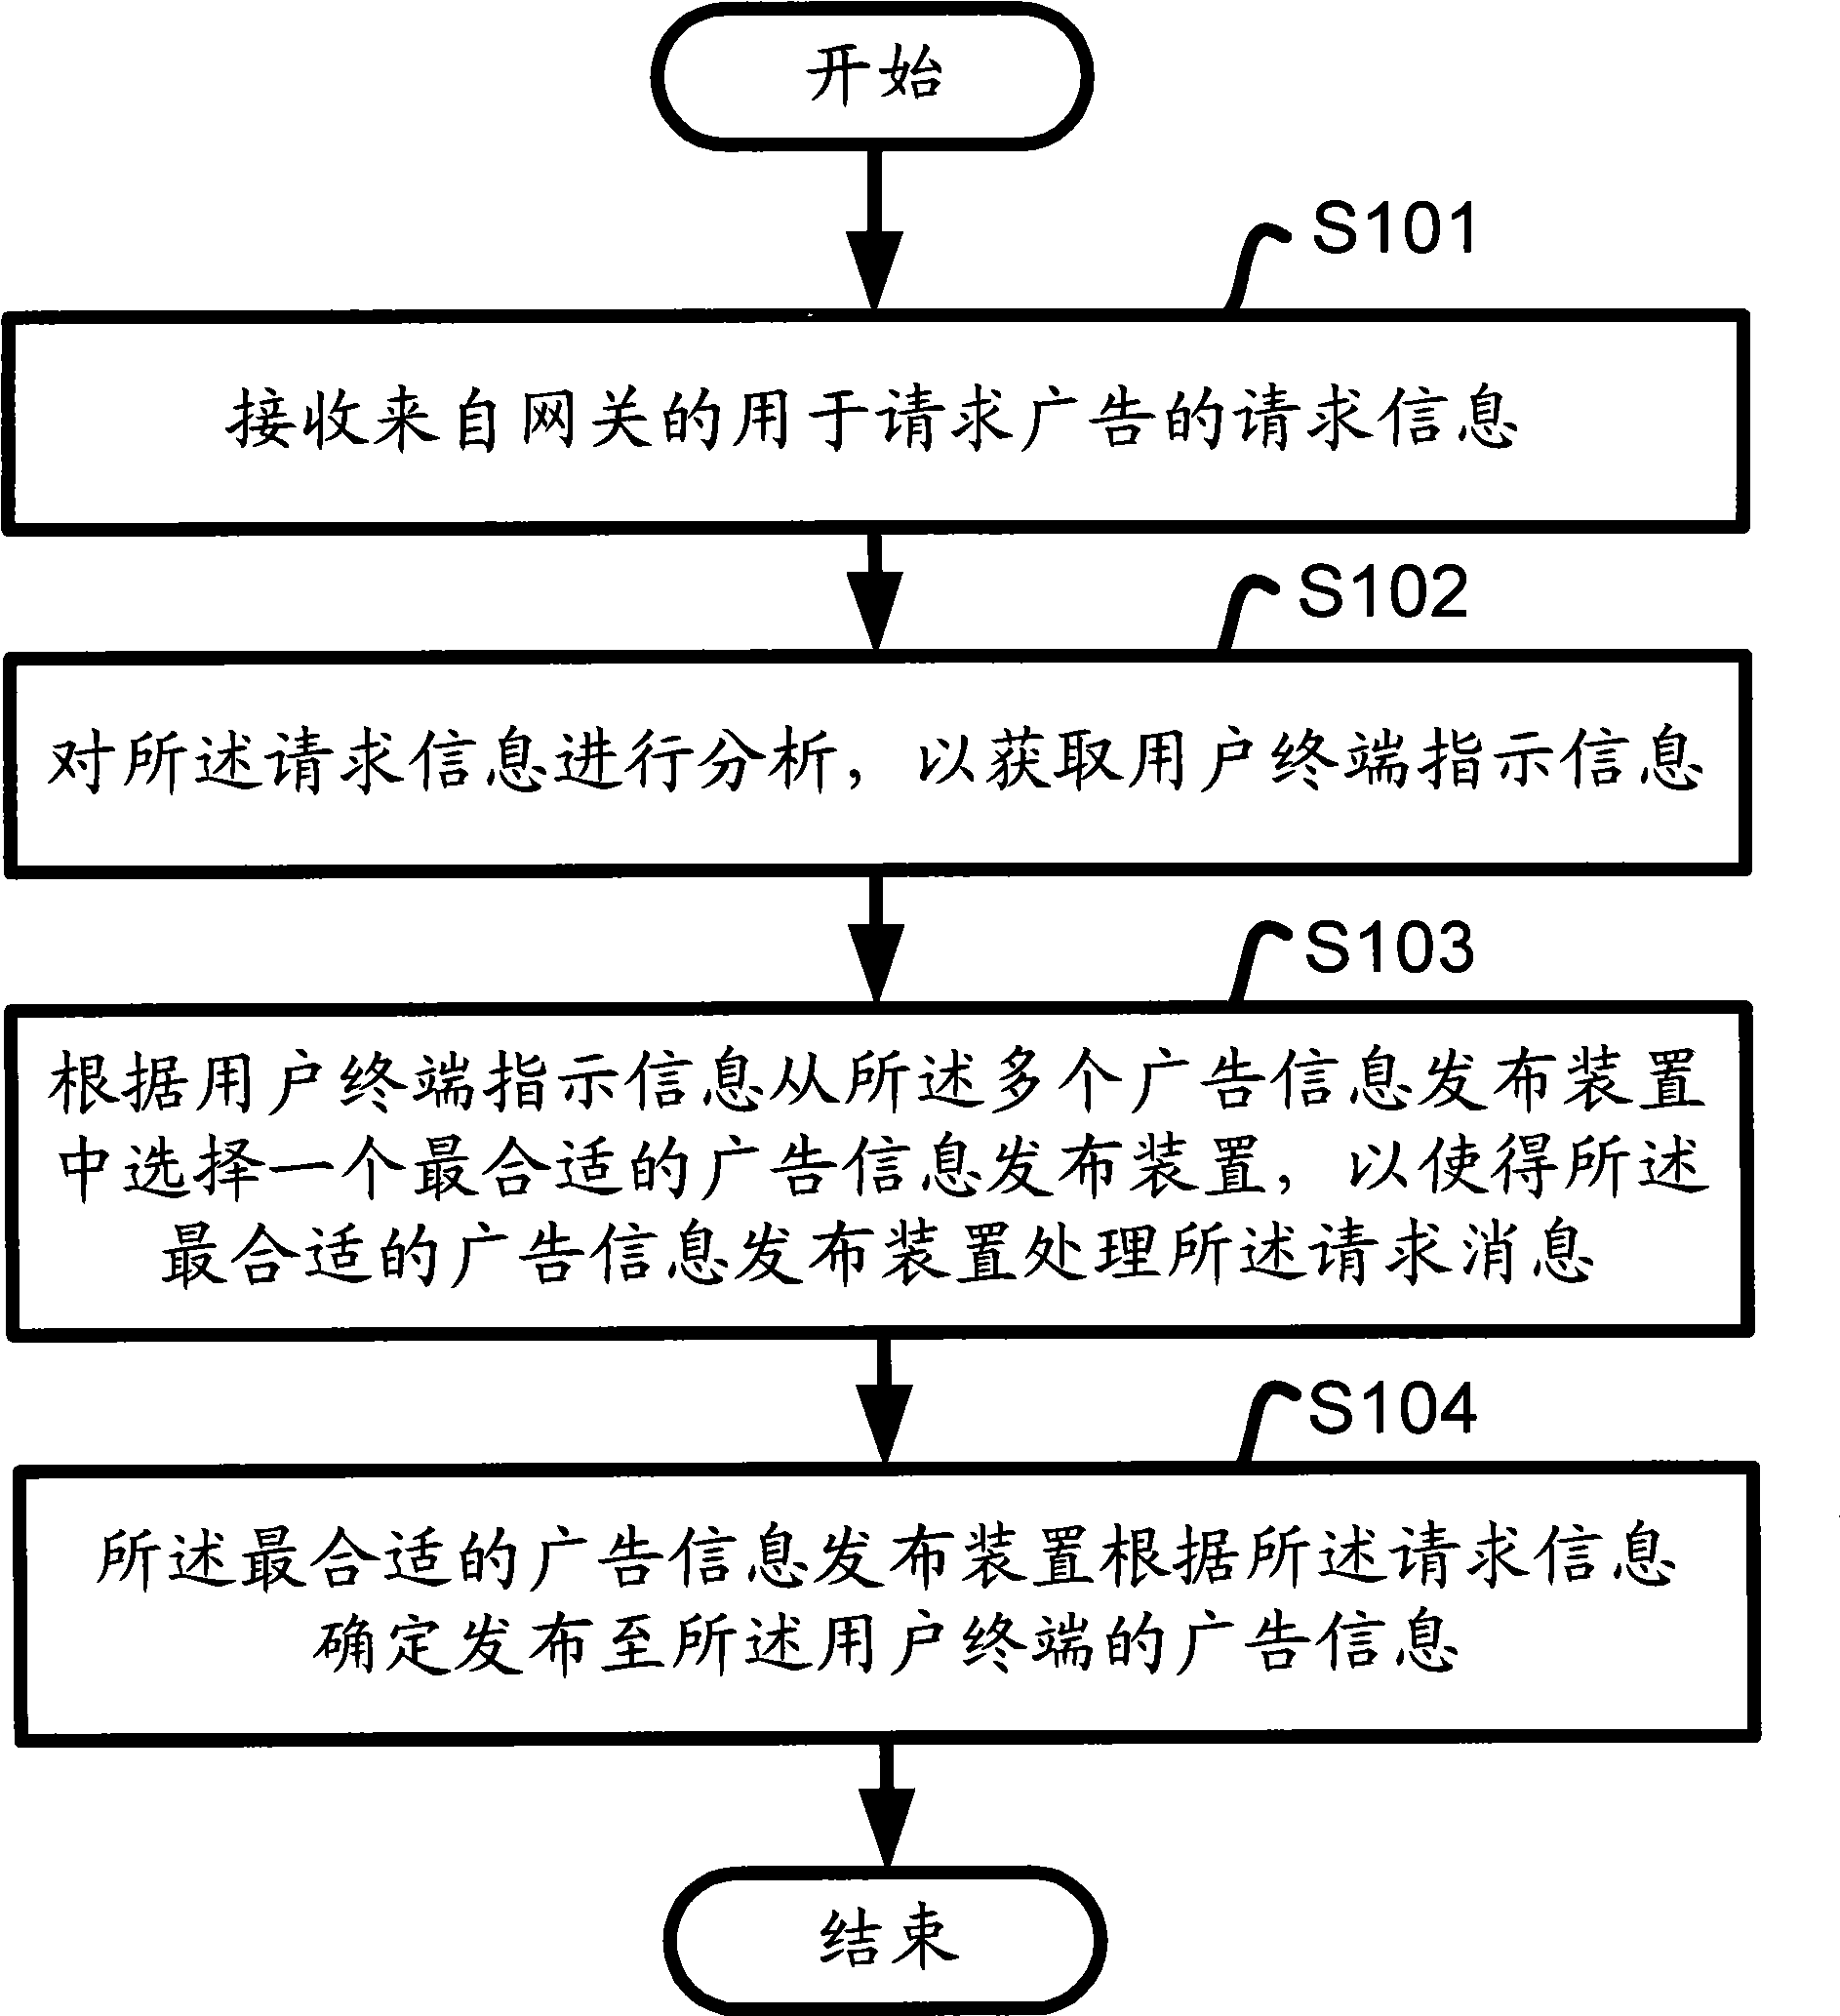 Advertisement issuance control method and apparatus based on multi-advertisement information issuing apparatus